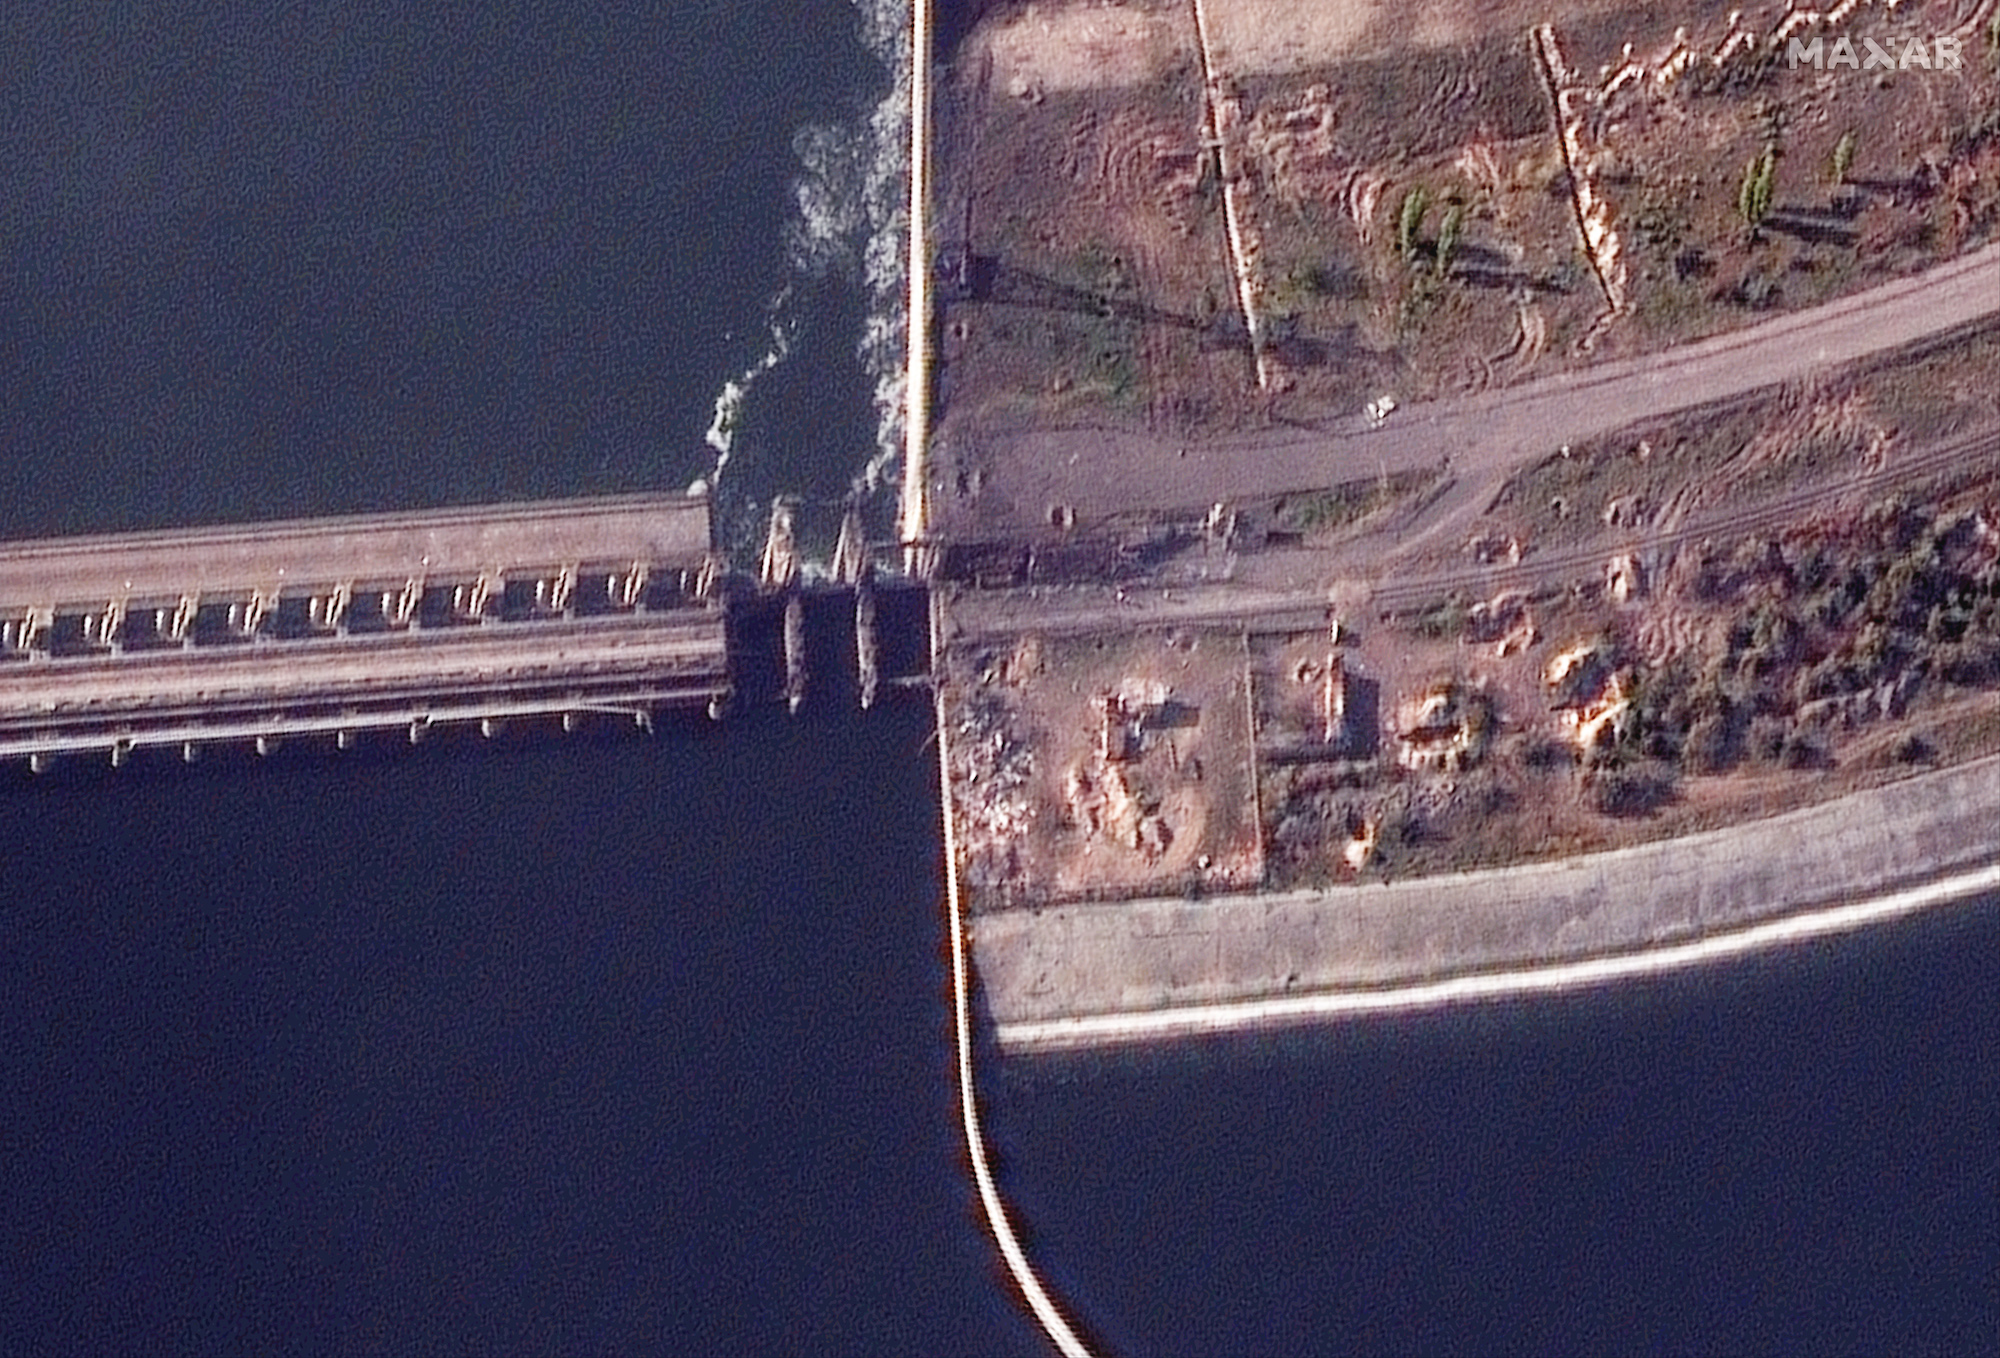 A satellite image shows the extent oof damage on the Nova Kakhovka dam in the Kherson region.